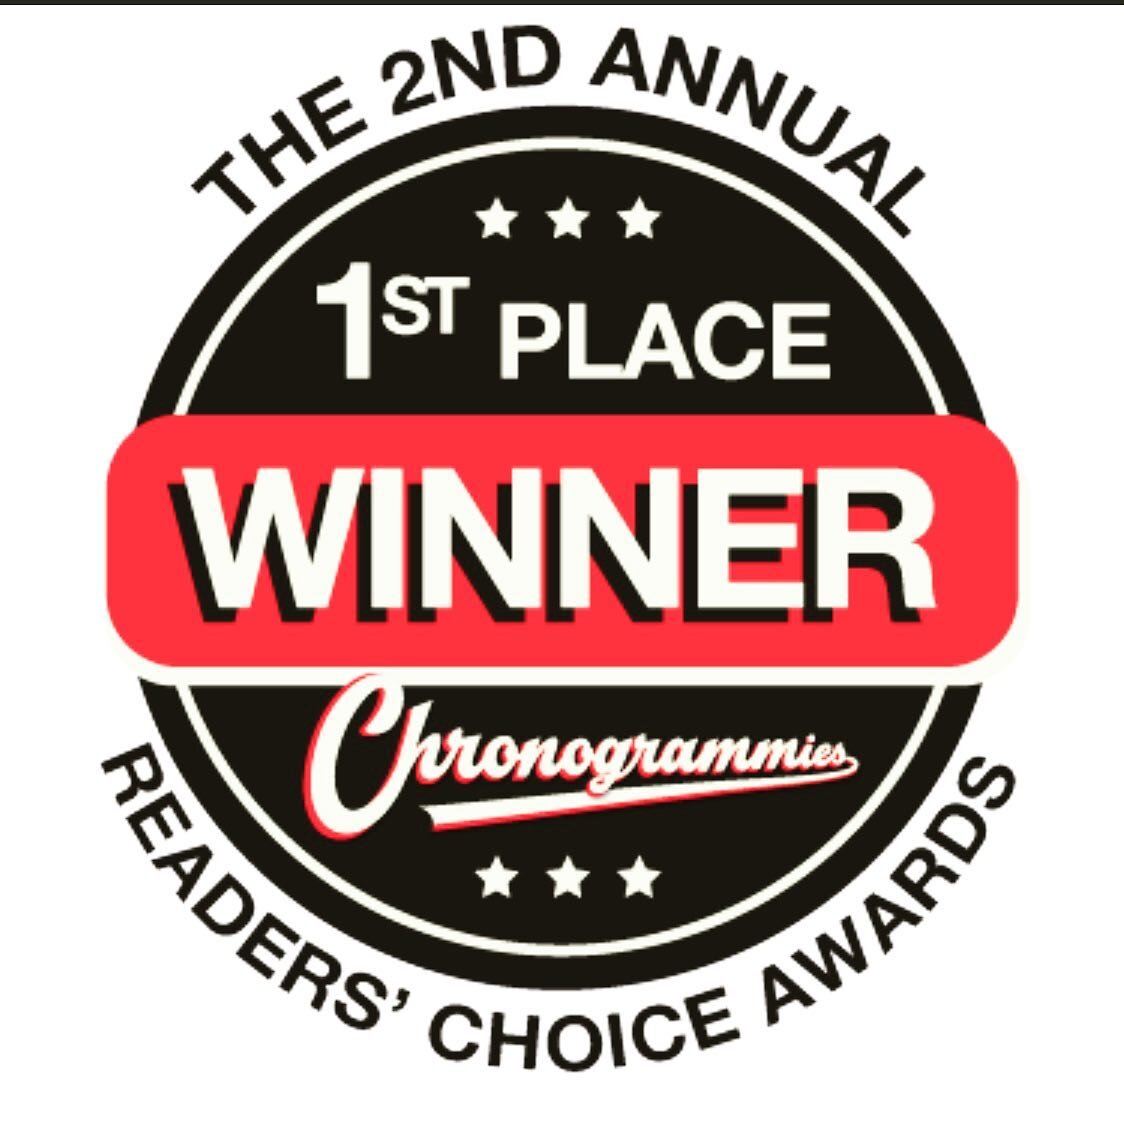 THANK YOU!! We are the 1st Place winners for wedding rentals !  To celebrate we are offering a 10% discount for one week July 5-12 on your rental.  Give us a call!!! #firstplace #1stplace #winner #chronogram #chronogrammies #2021 #wedding @chronogram